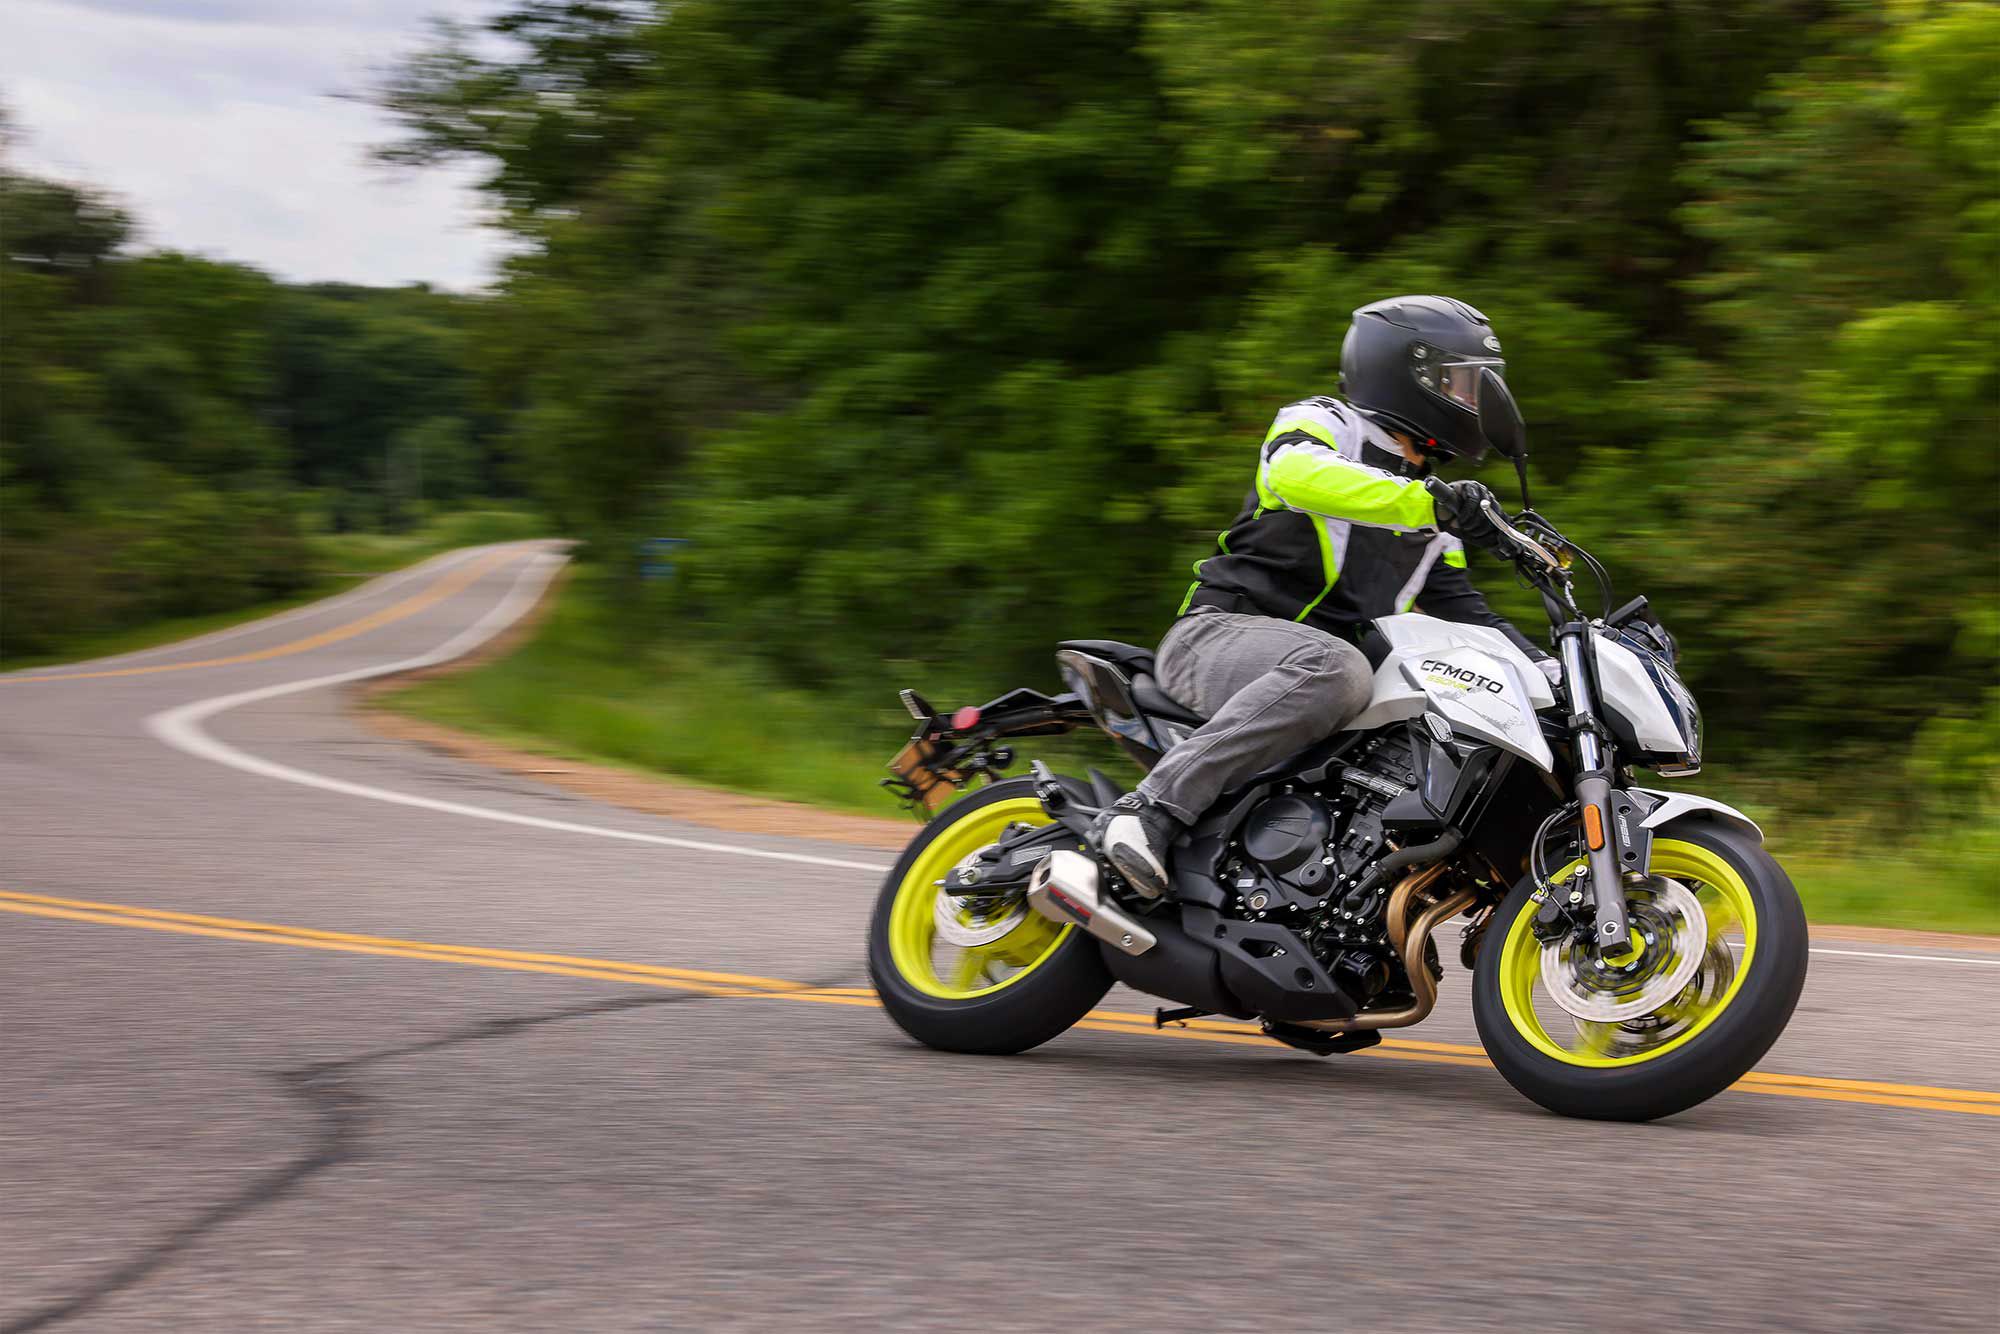 The 650NK chassis is well-sorted and feels planted when the riding turns spirited.